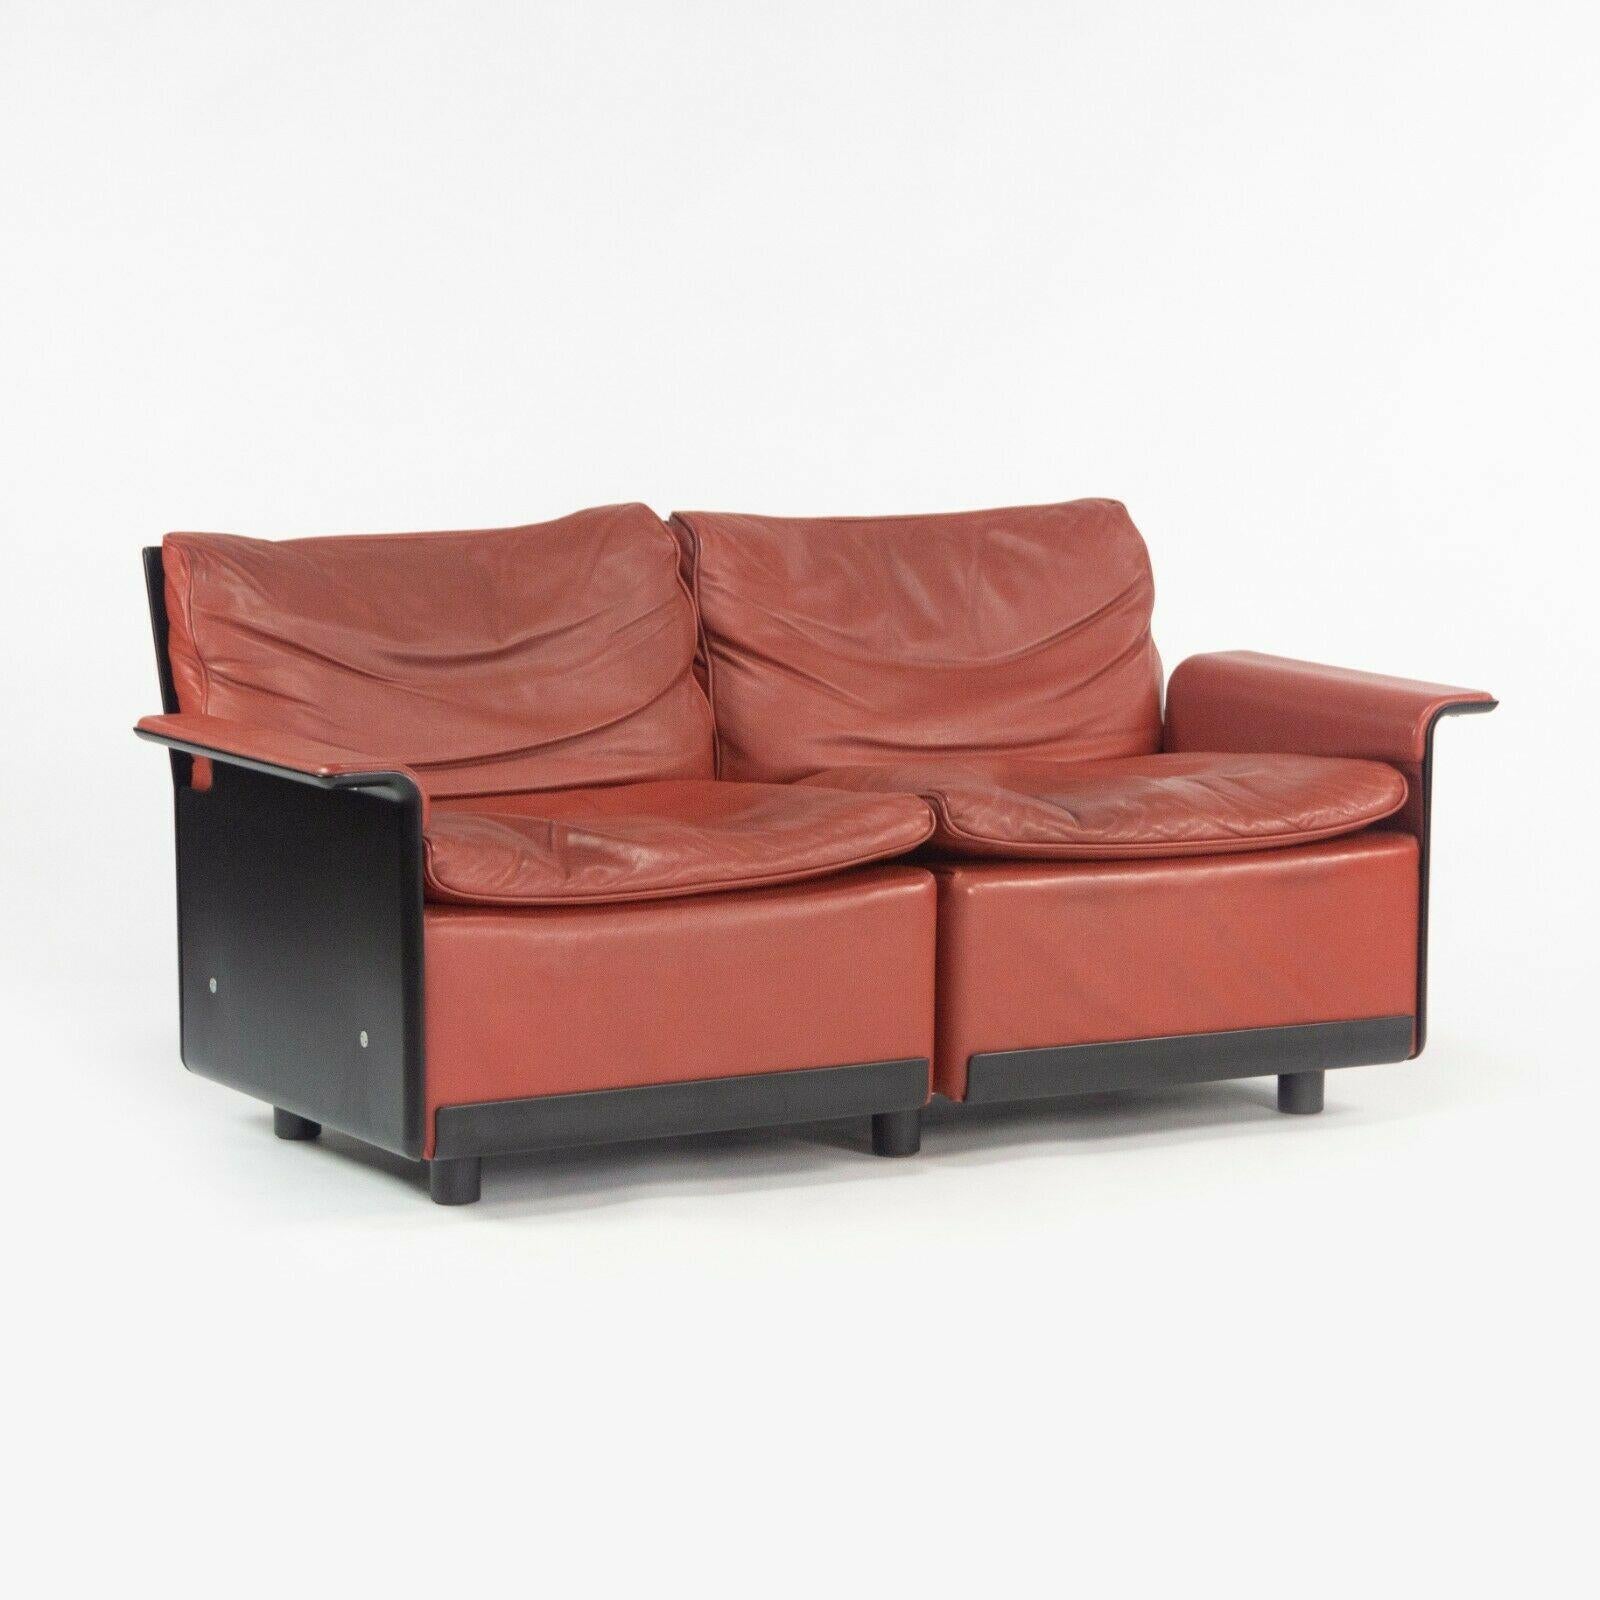 Listed for sale is a rare Dieter Rams for Vitsoe 620 two-seater loveseat with gorgeous red leather upholstery and black casing. This is a favorite of ours, as dieter rams is of course one of the most beloved industrial designers of the last hundred